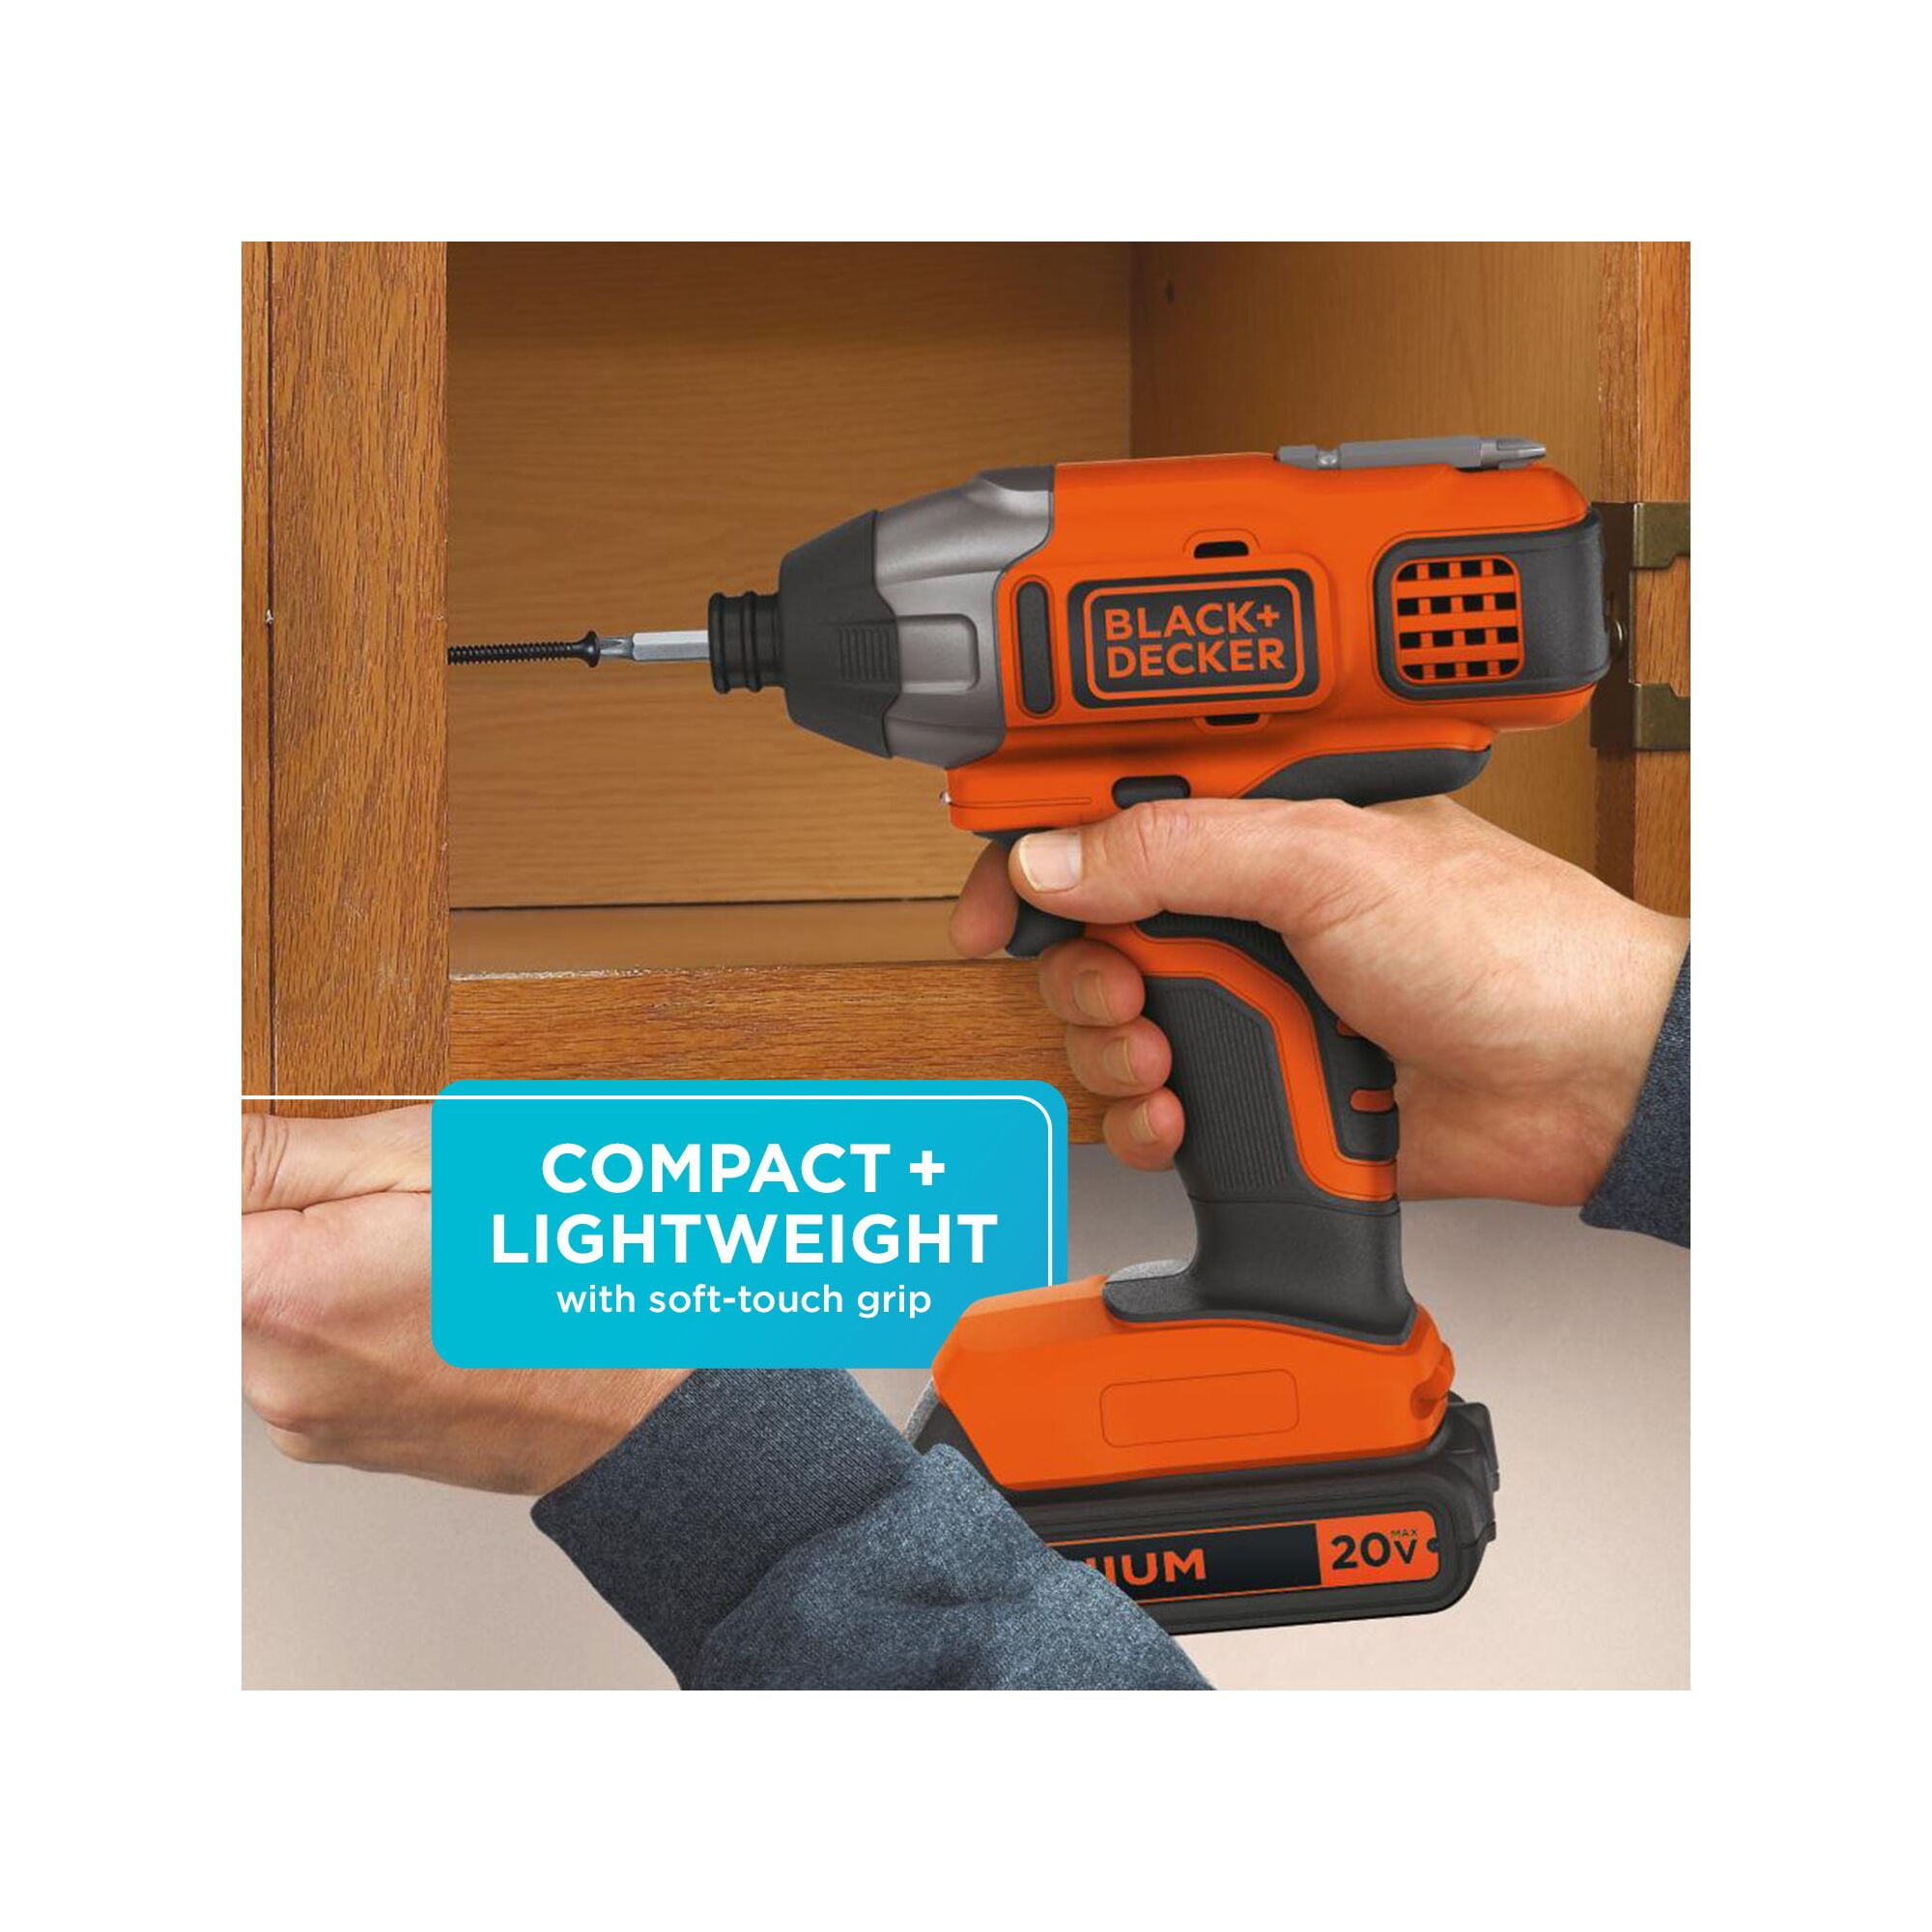  BLACK+DECKER BDINF20C 20V Lithium Cordless Multi-Purpose  Inflator (Tool Only) with BLACK+DECKER BDC120VA100 Cordless Project Kit  with 100 Accessories